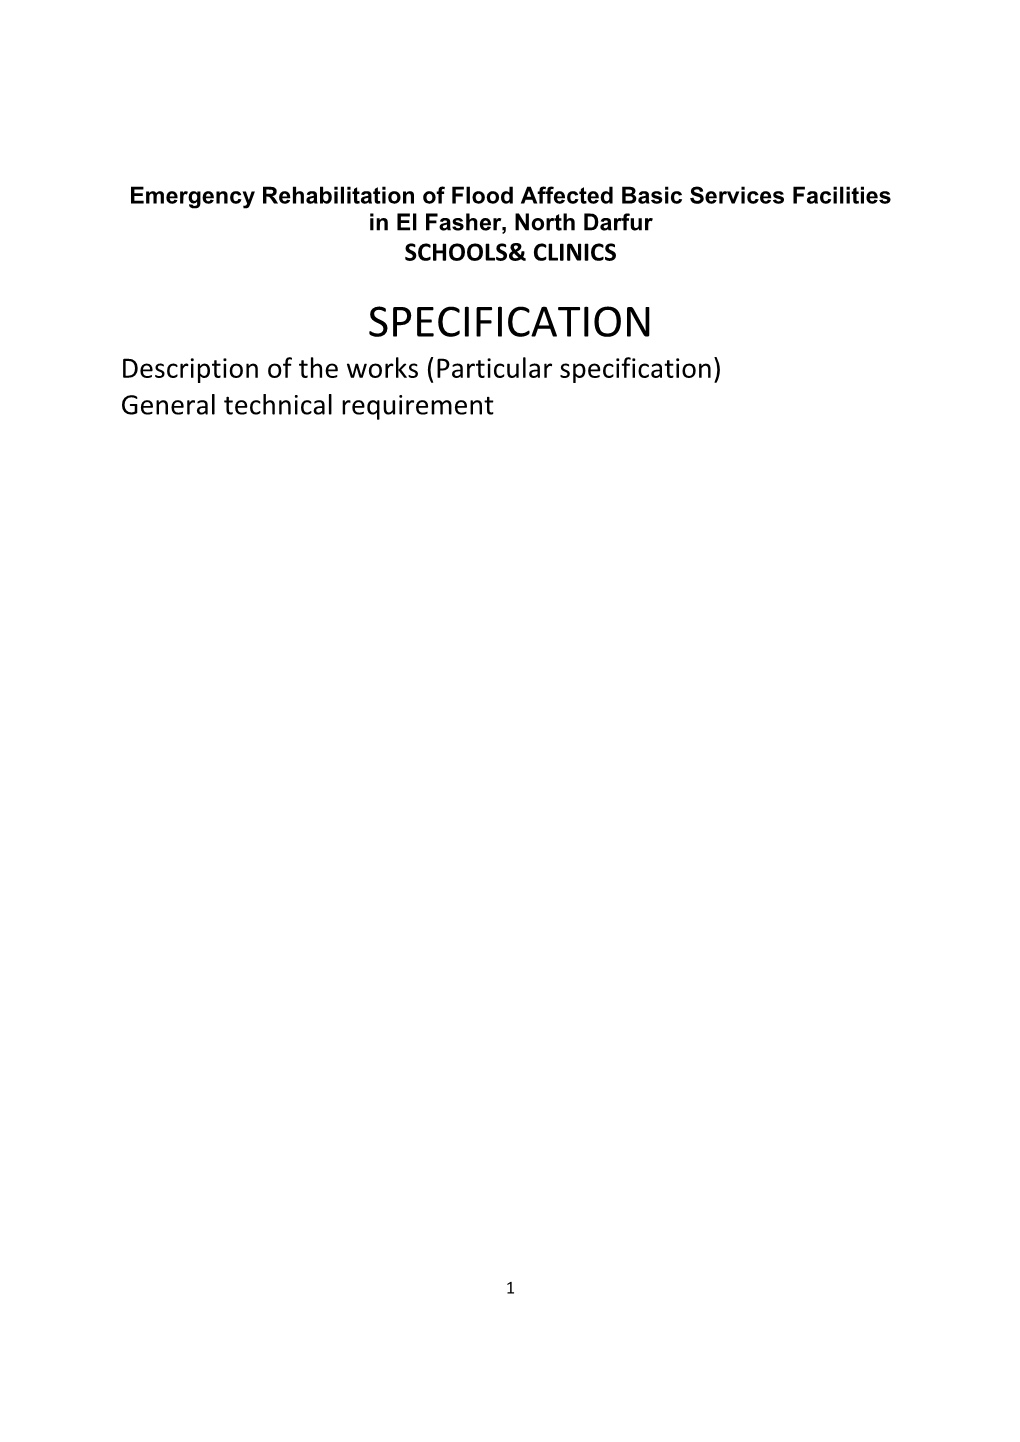 SPECIFICATION Description of the Works (Particular Specification) General Technical Requirement